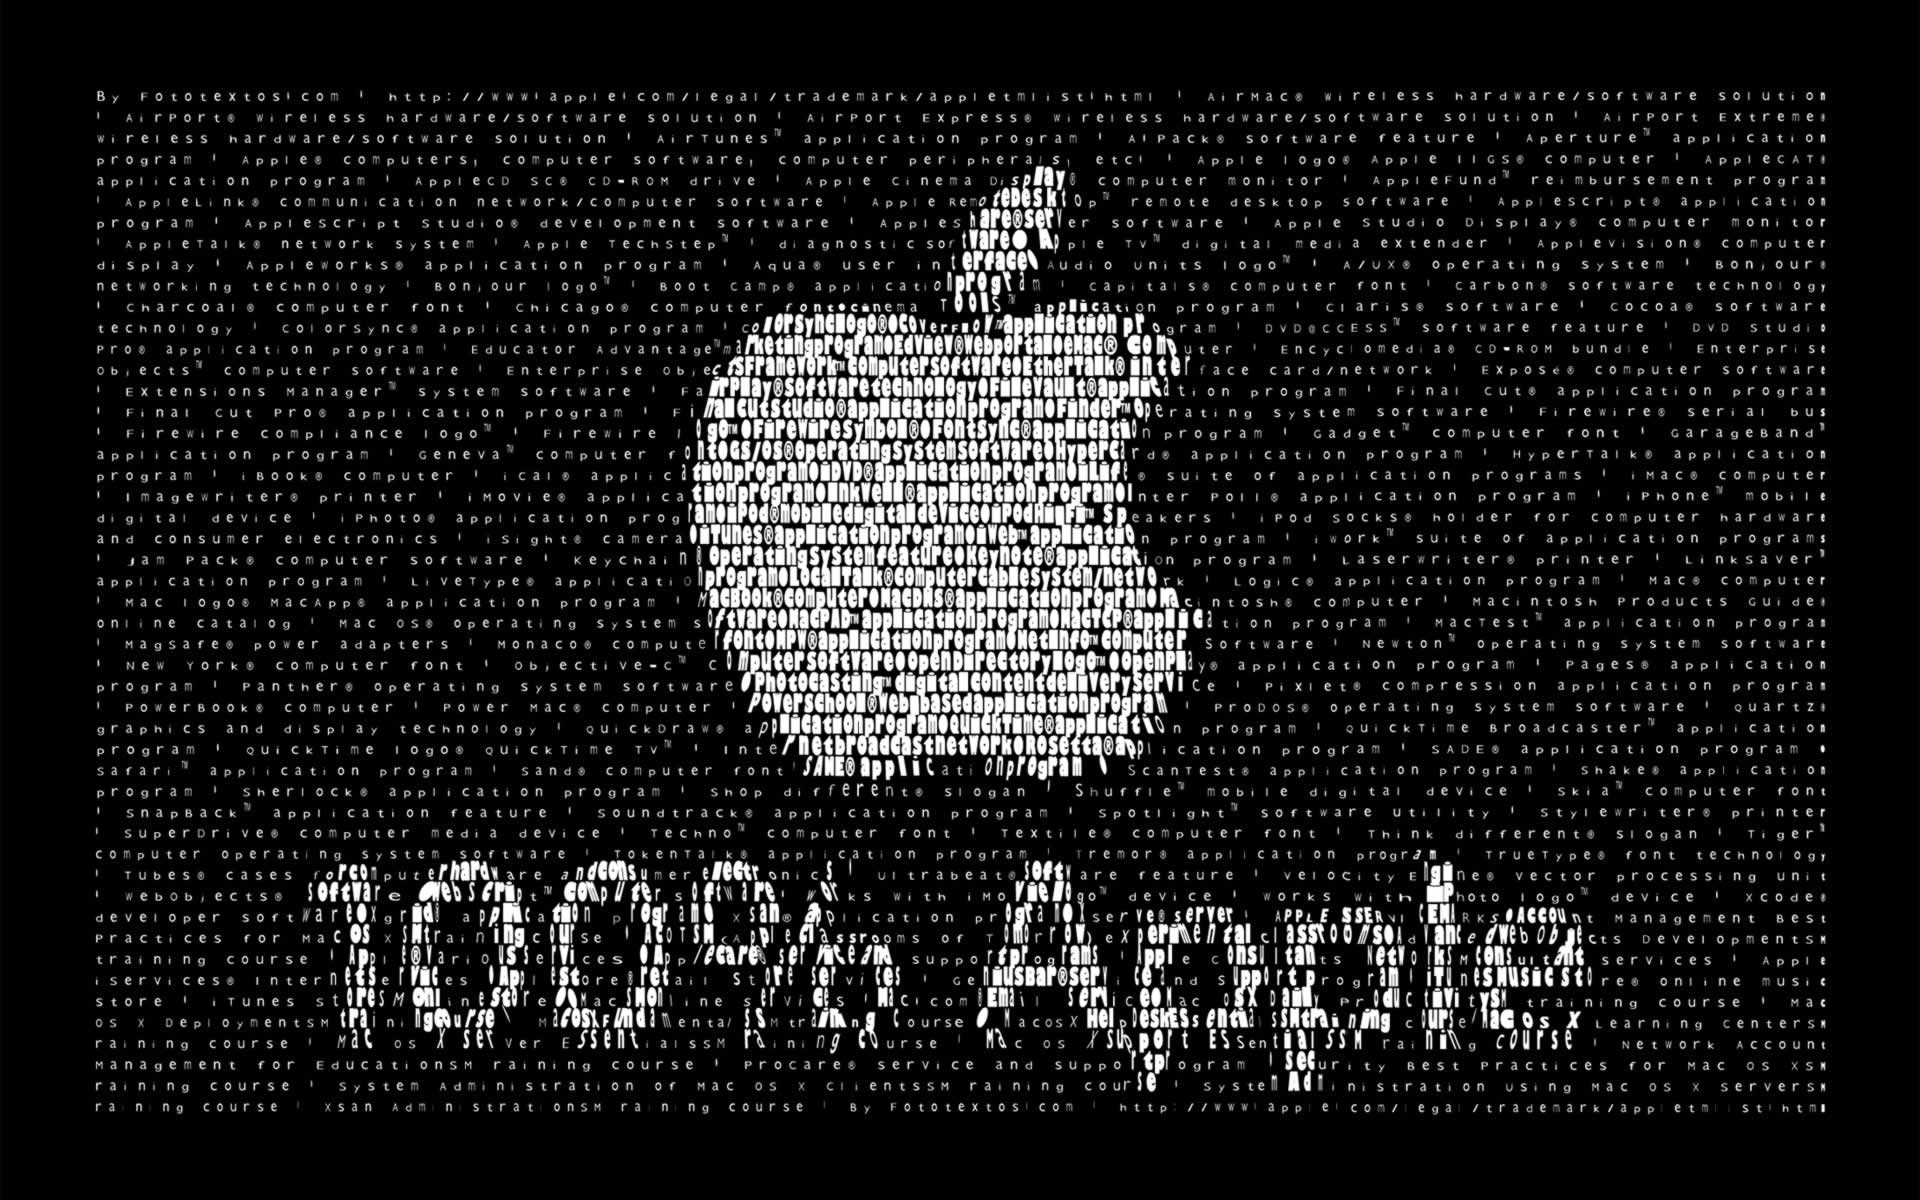 Fototext Apple Logo Best Background Full HD1920x1080p, 1280x720p, – HD Wallpapers Backgrounds Desktop, iphone & Android Free Download